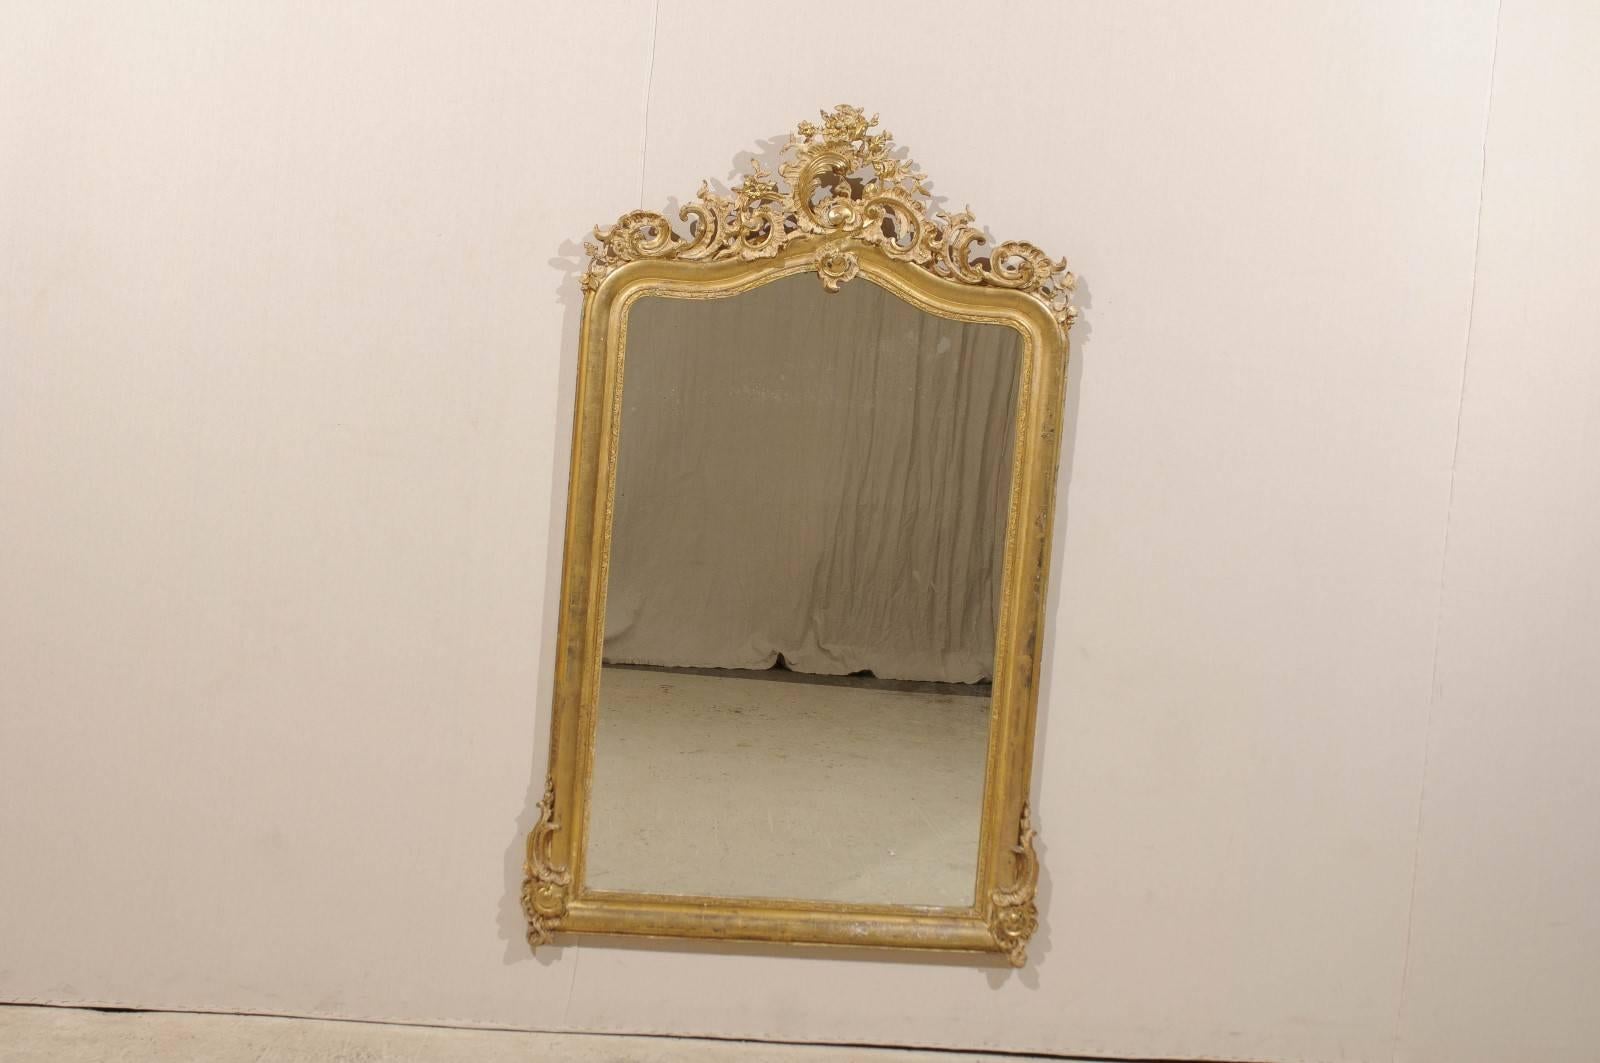 A French Rococo style wood carved mirror. This mid-19th century French giltwood rectangular mirror features a wonderfully carved crest and lower corner carved accents. The exquisite decor is made of asymmetrical 